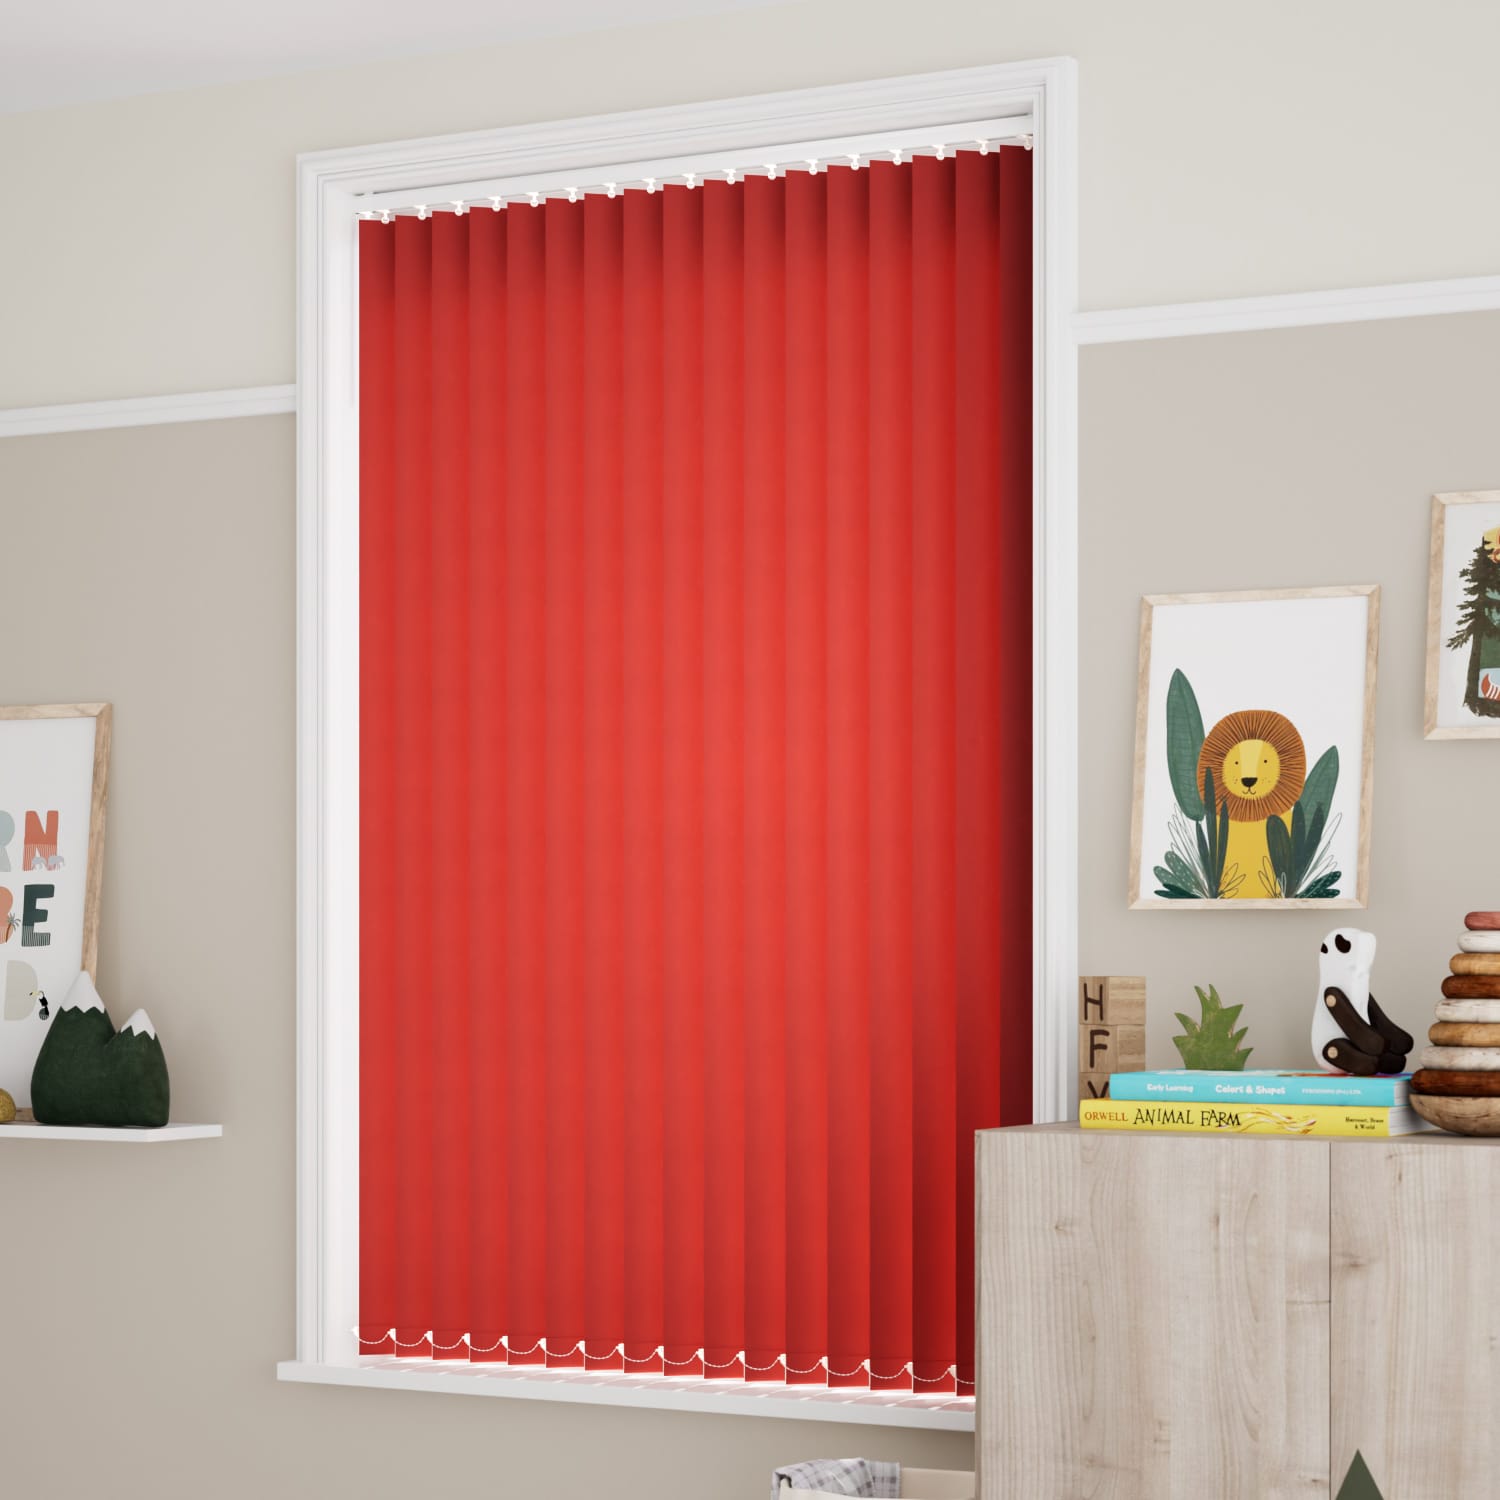 Vertical Blinds, Fiery and Bright Vertical Blinds